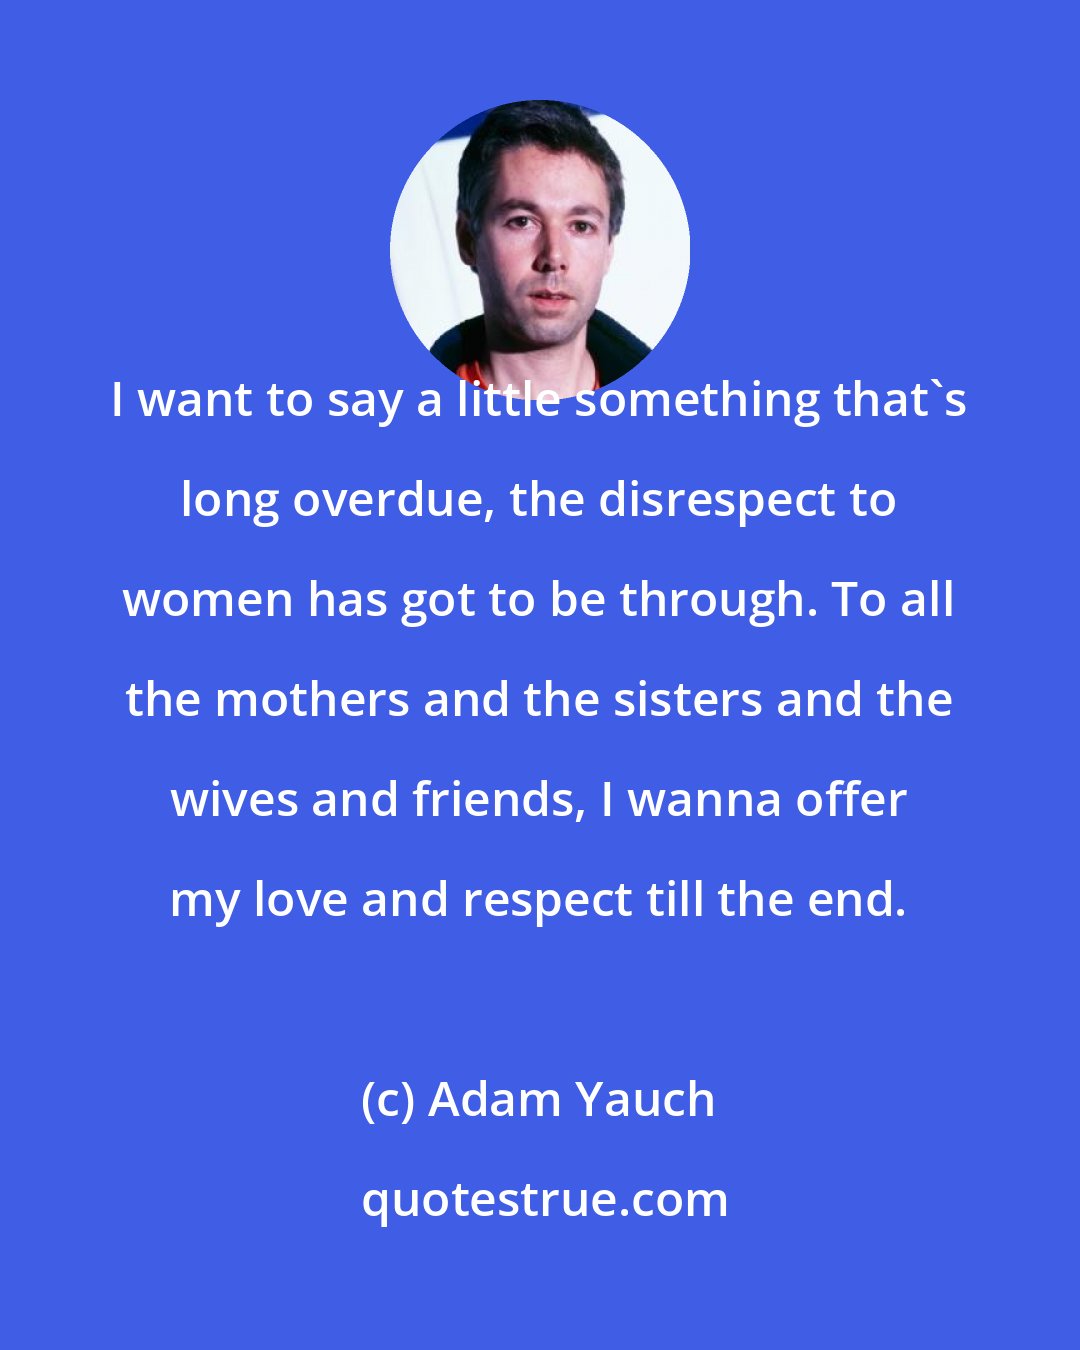 Adam Yauch: I want to say a little something that's long overdue, the disrespect to women has got to be through. To all the mothers and the sisters and the wives and friends, I wanna offer my love and respect till the end.